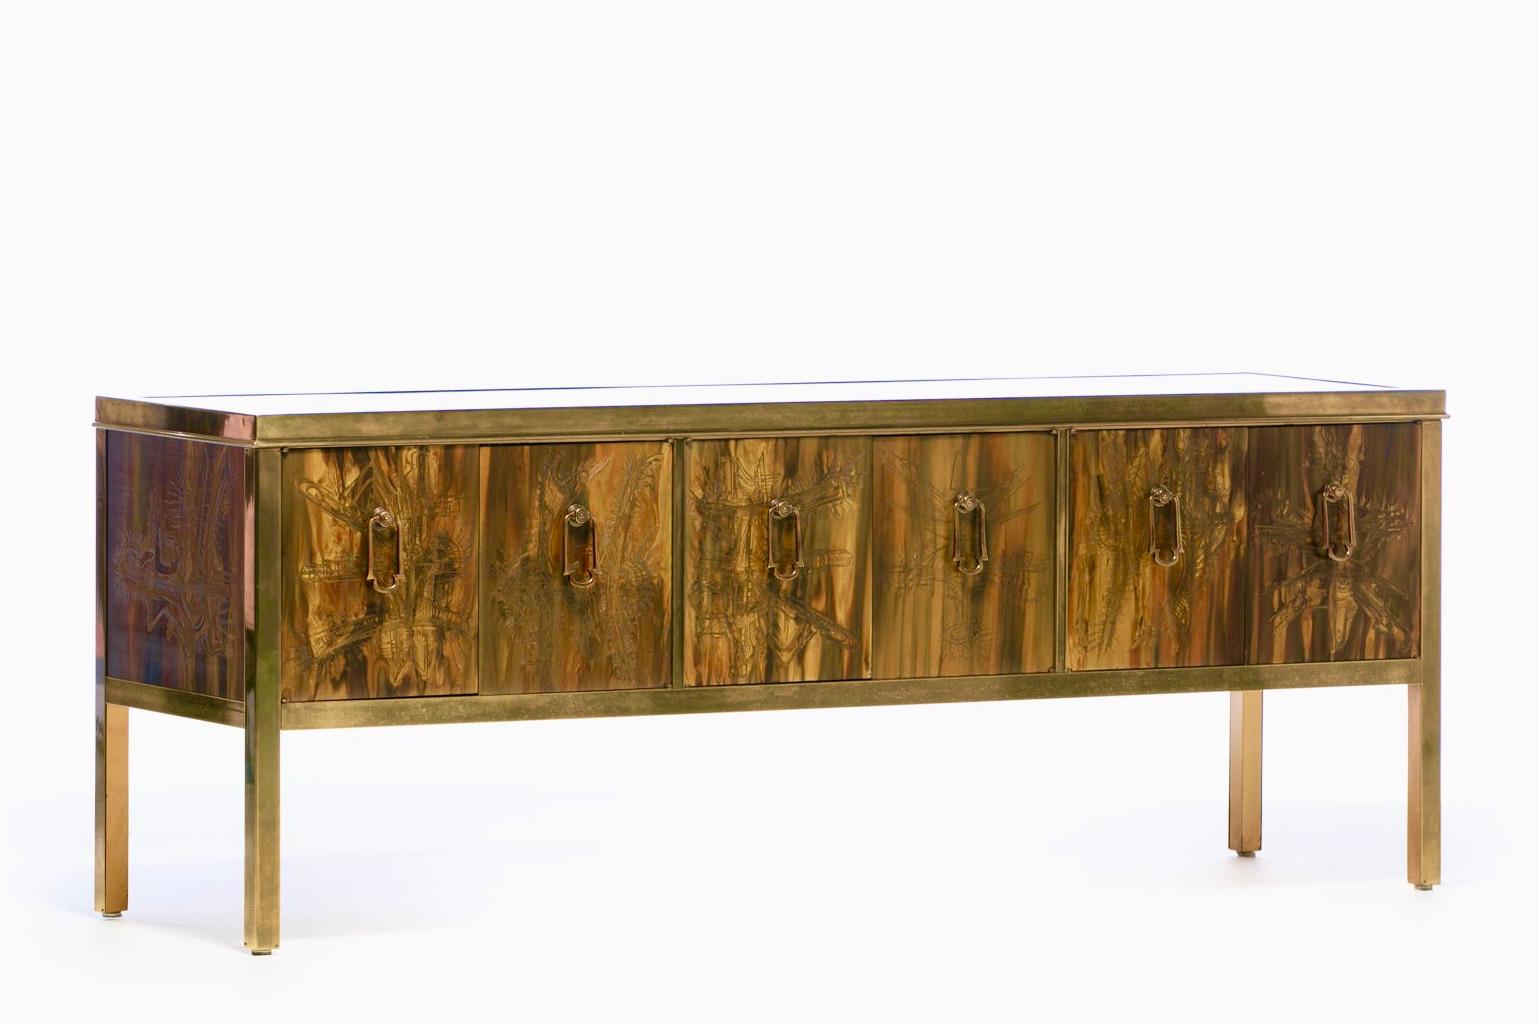 Late 20th Century Bernhard Rohne Acid Etched Brass Credenza or Console for Mastercraft, c. 1970s